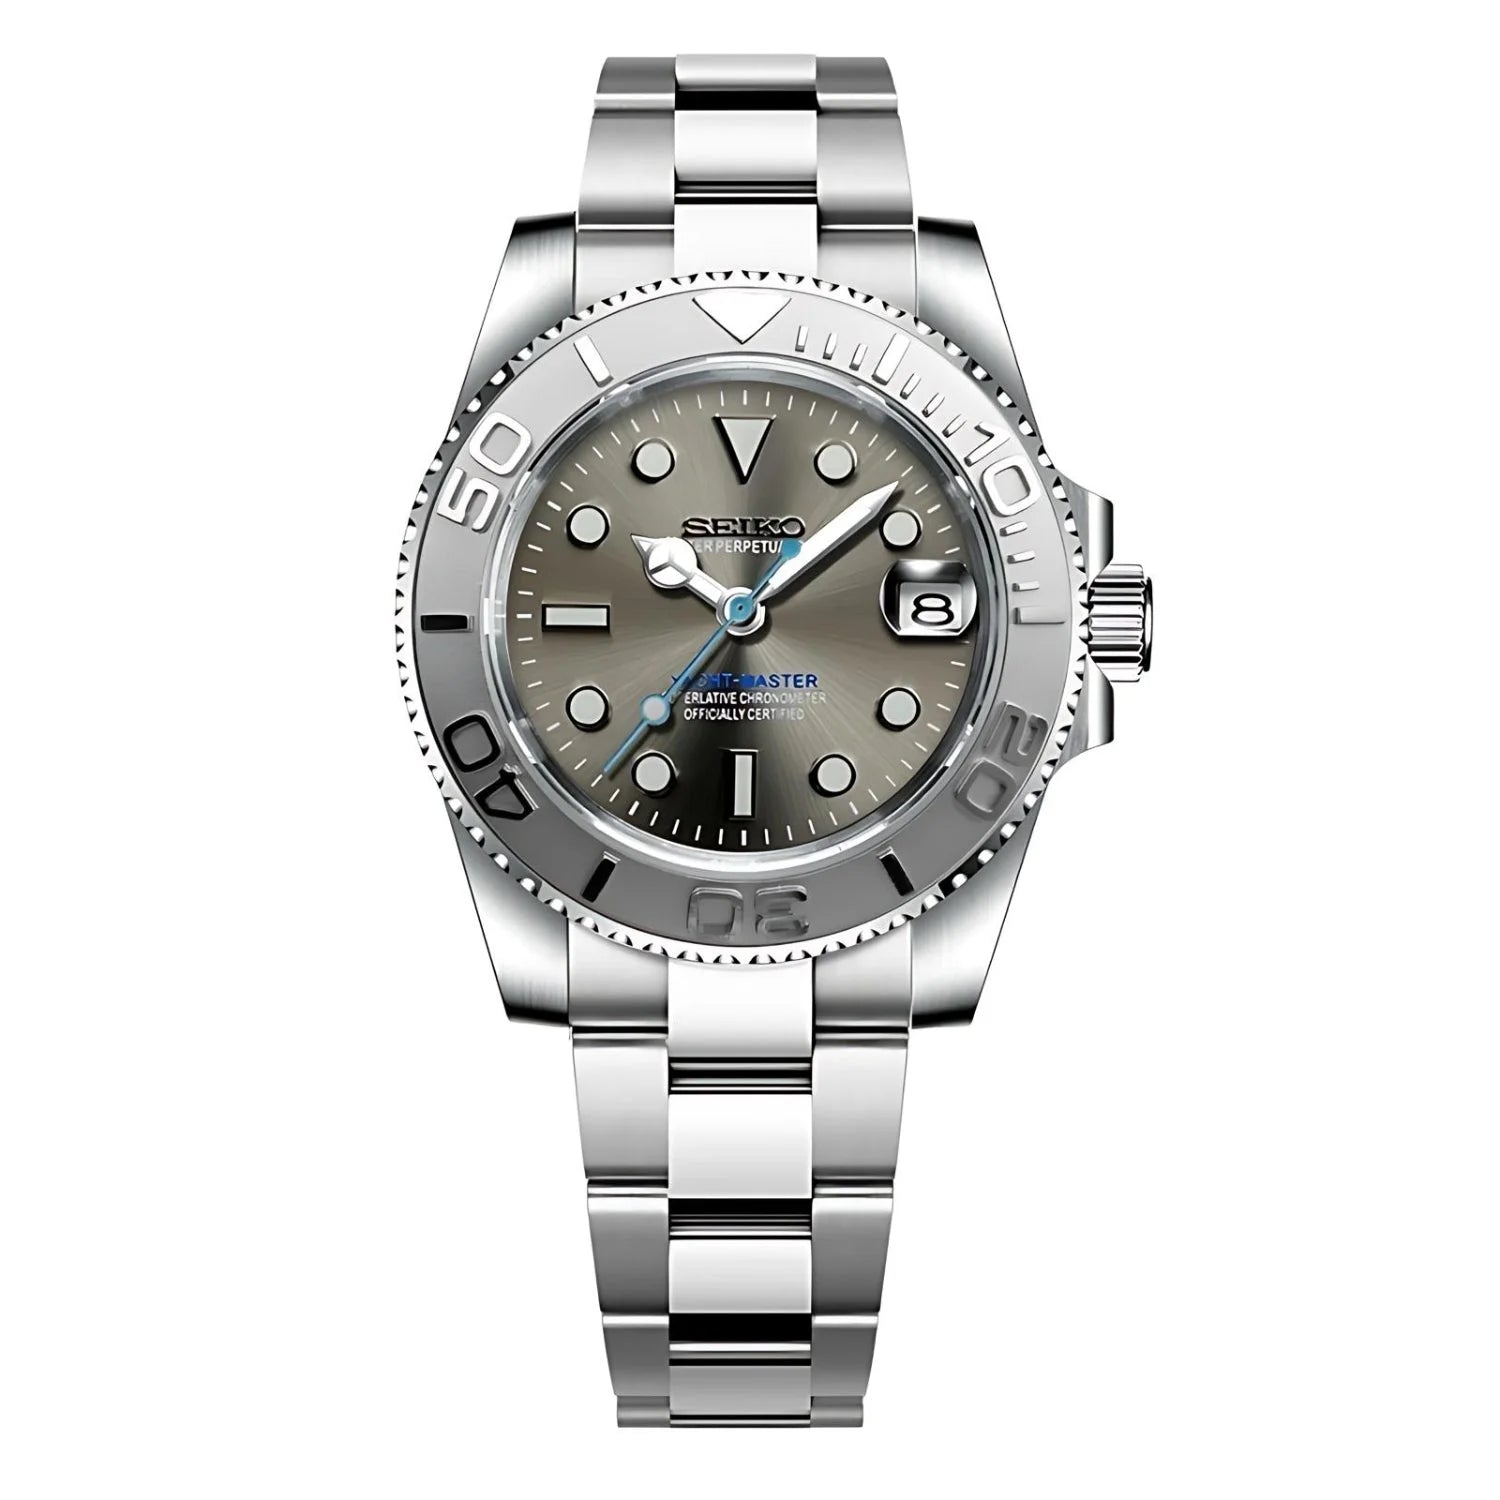 Seikomarine Silver: Stainless Steel Seiko Dive Watch With Gray Dial And Rotating Bezel